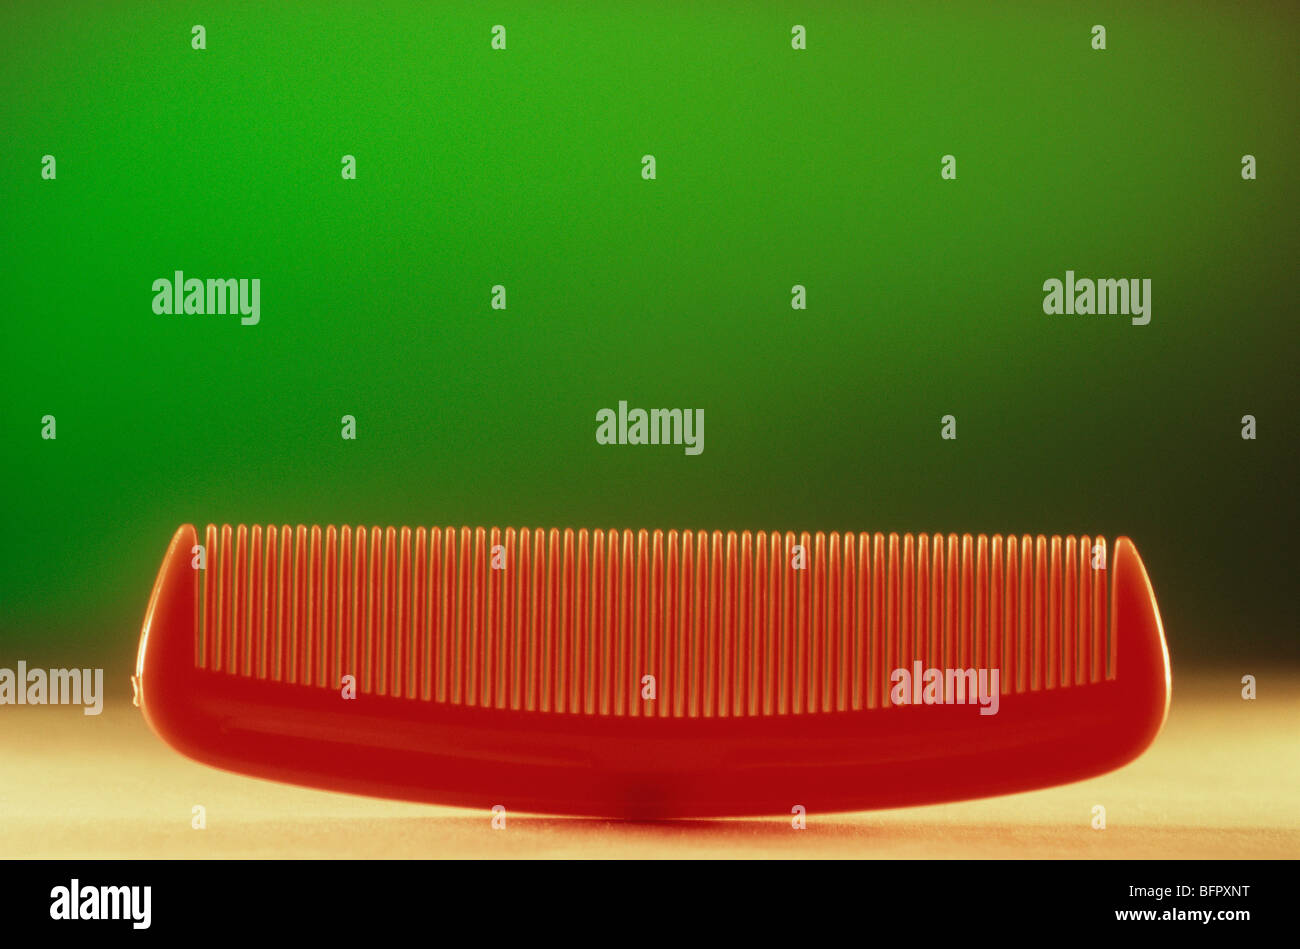 VHM 66692 : Concept ; plastic comb against green background Stock Photo